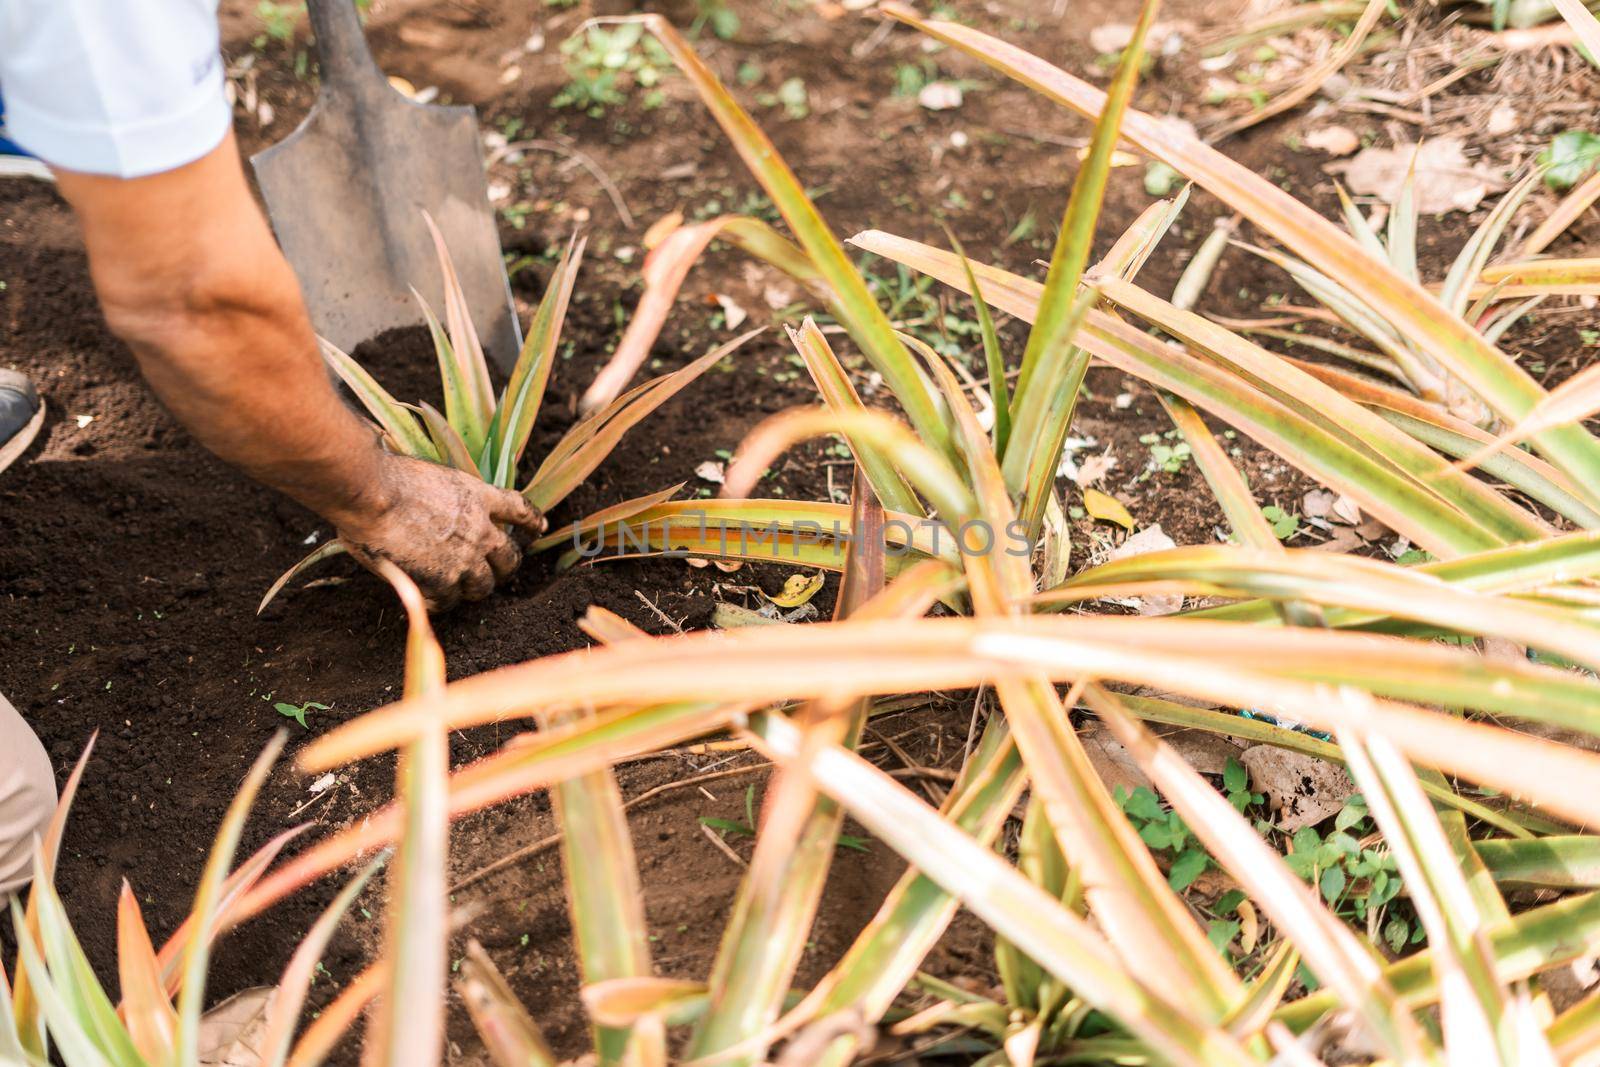 Closeup to the hand of a peasant harvesting a pineapple in the ground with the help of a shovel en Masaya Nicaragau